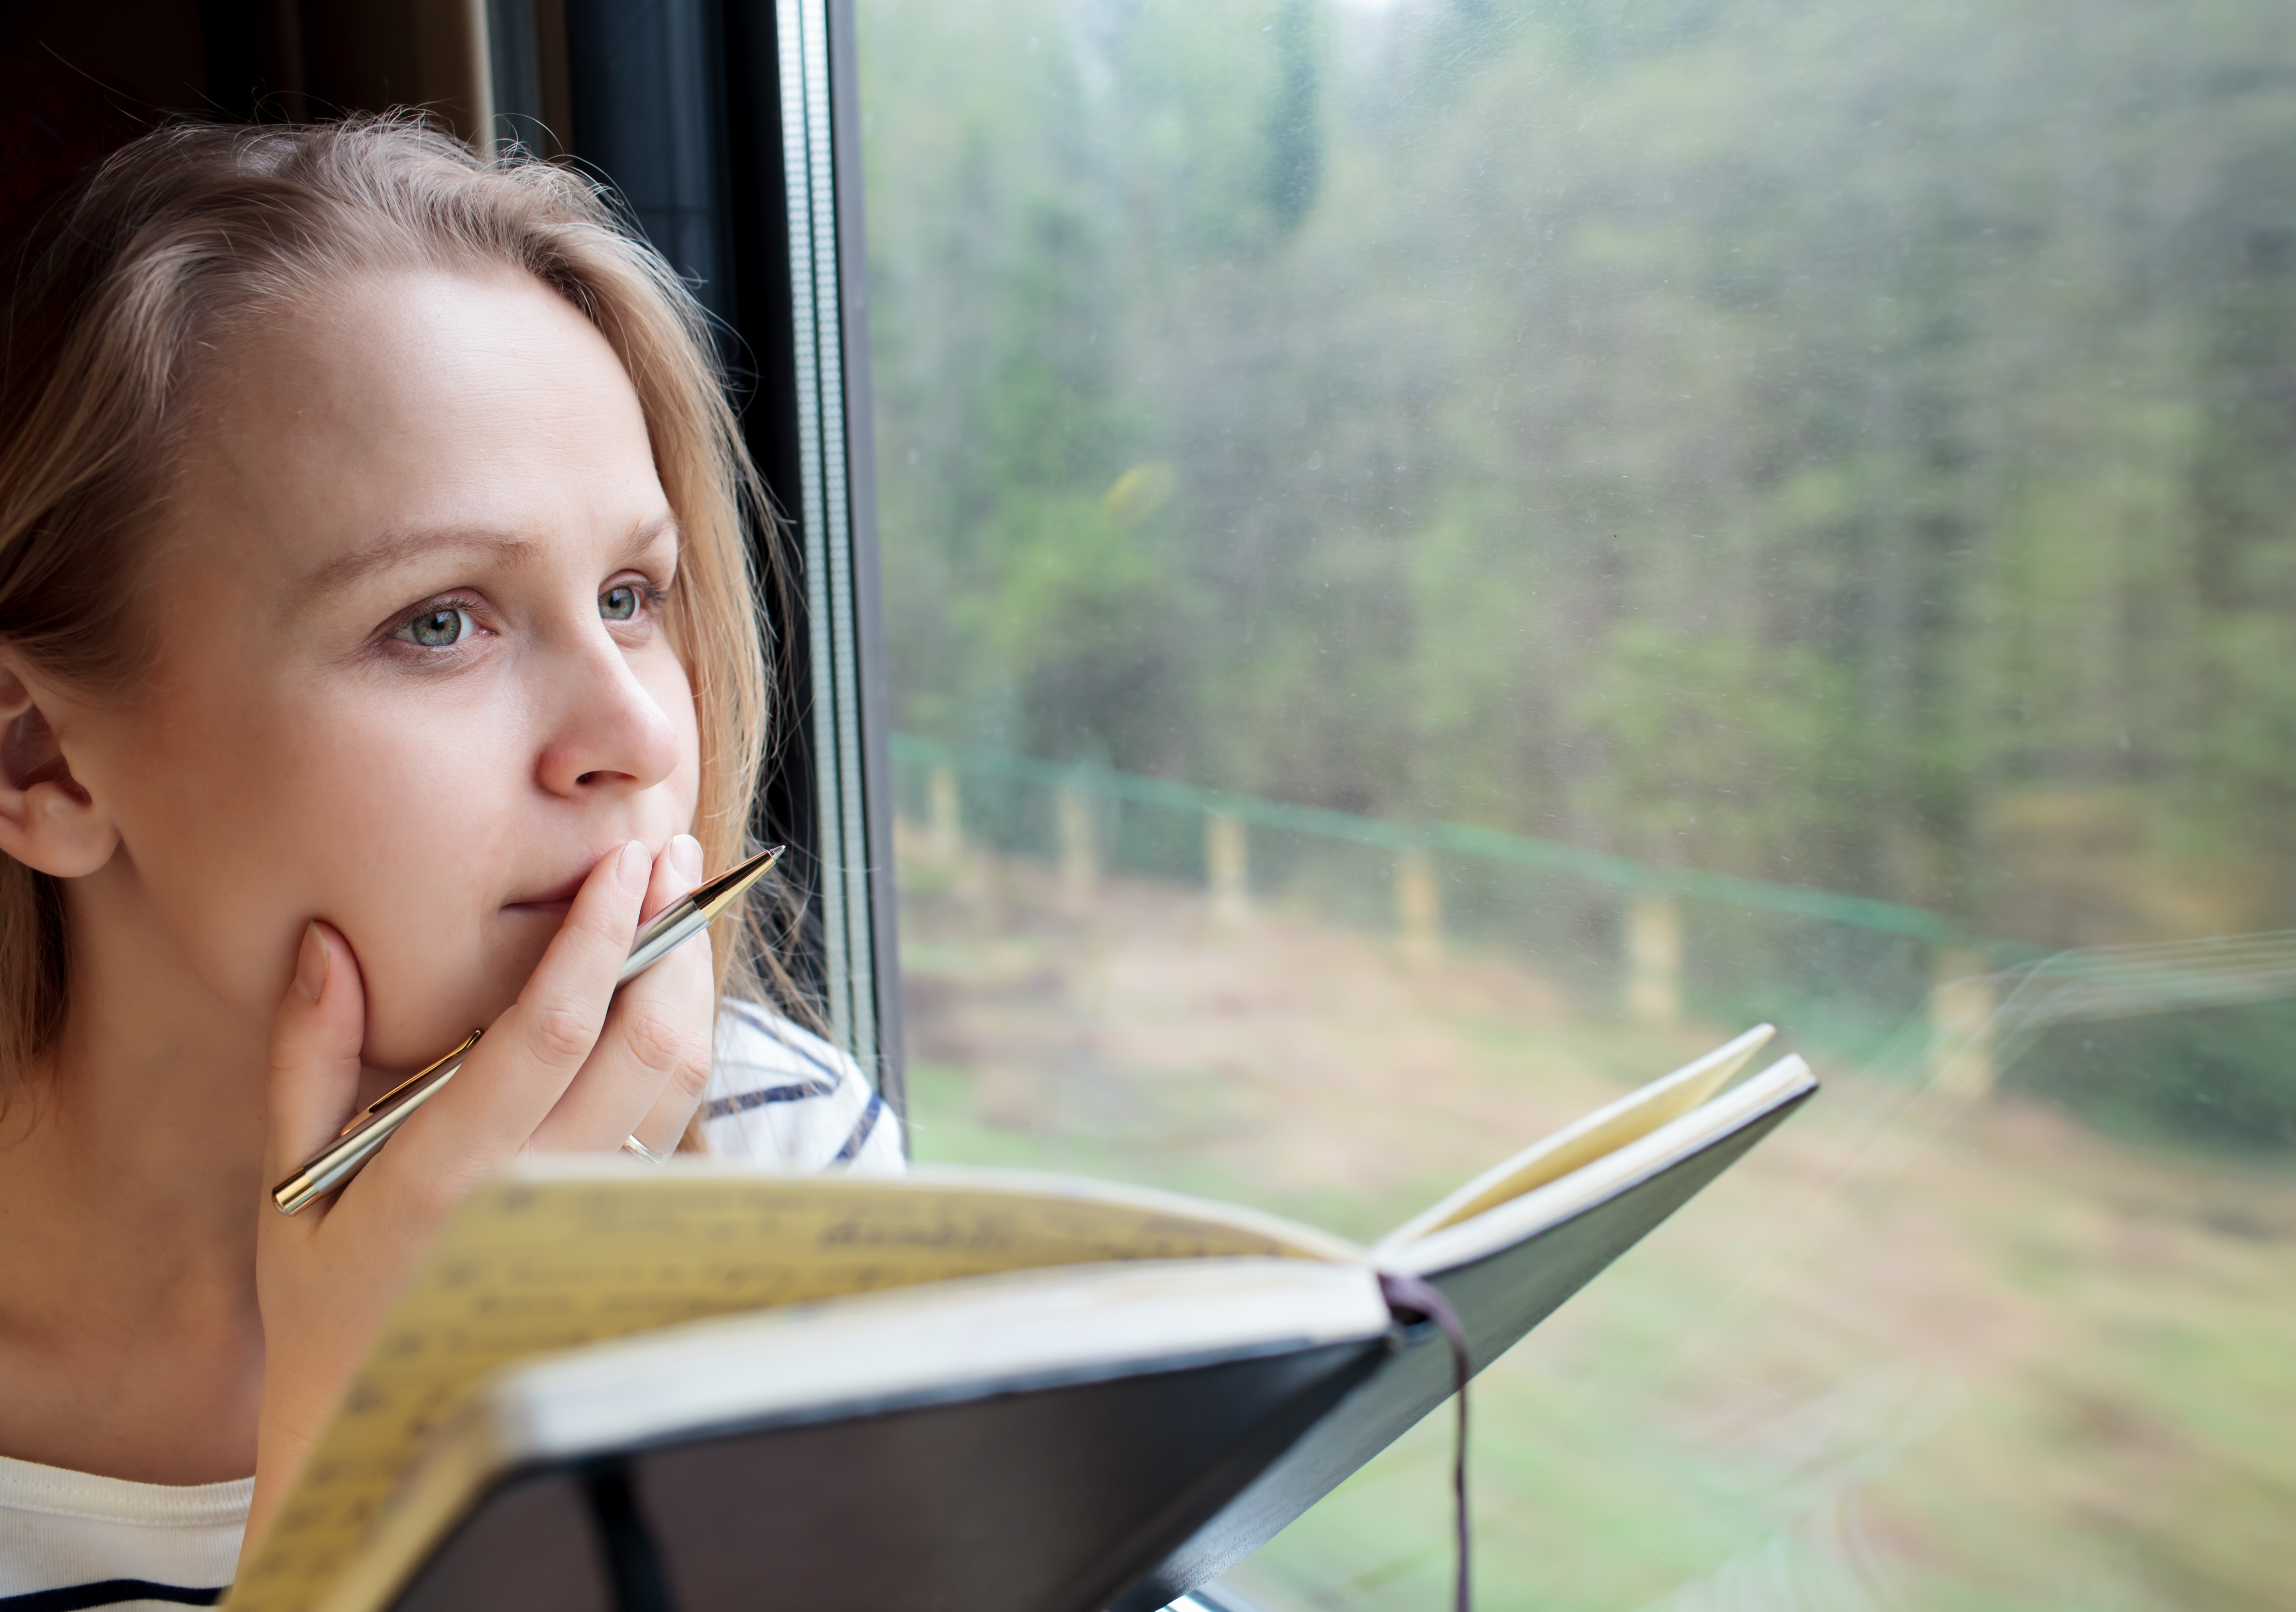 Young woman on a train writing notes in a diary or journal staring thoughtfully out of the window with her pen to her lips as she thinks of what to write